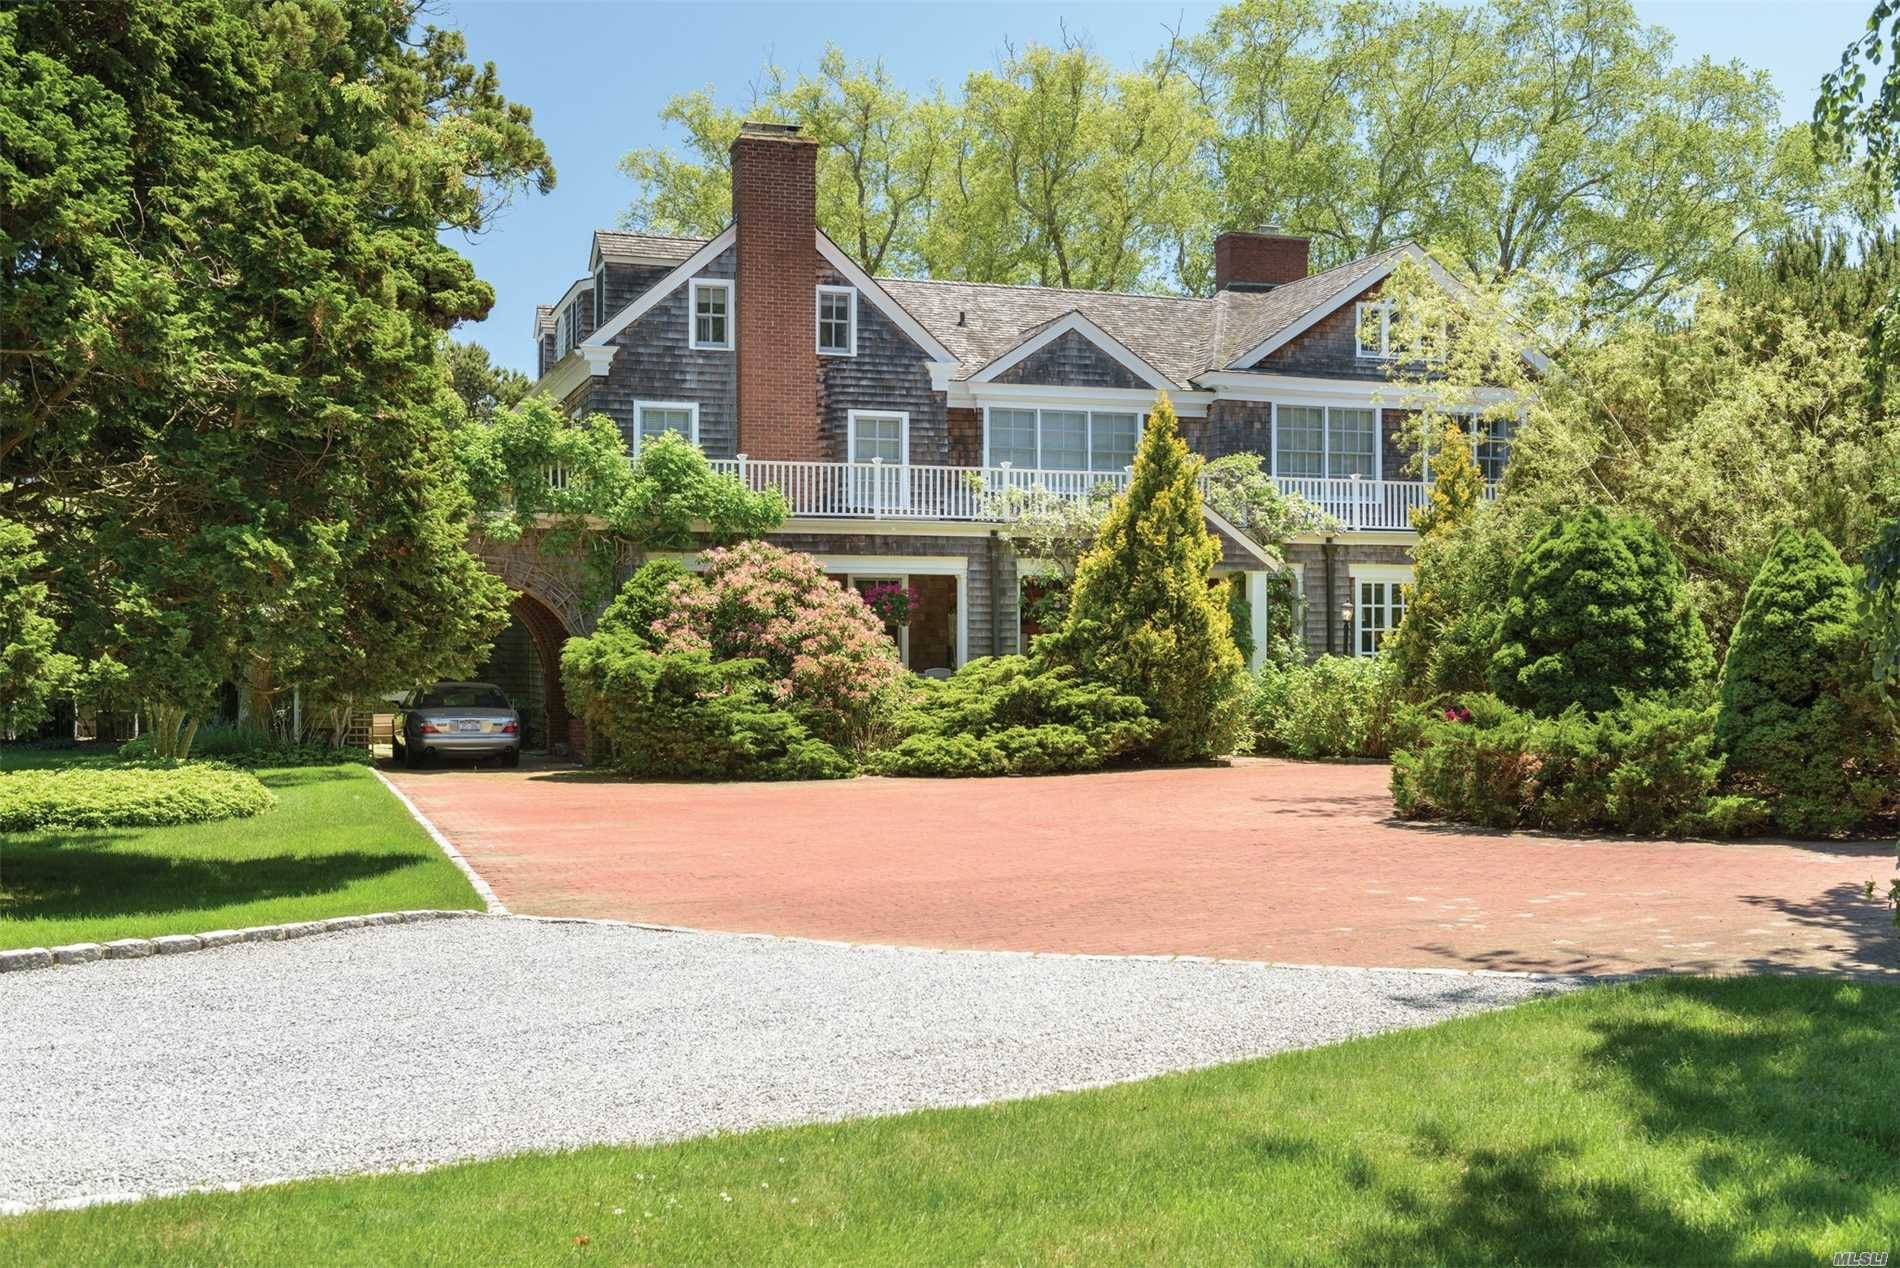 Pristine Hamptons Home In The Village Of Quogue.